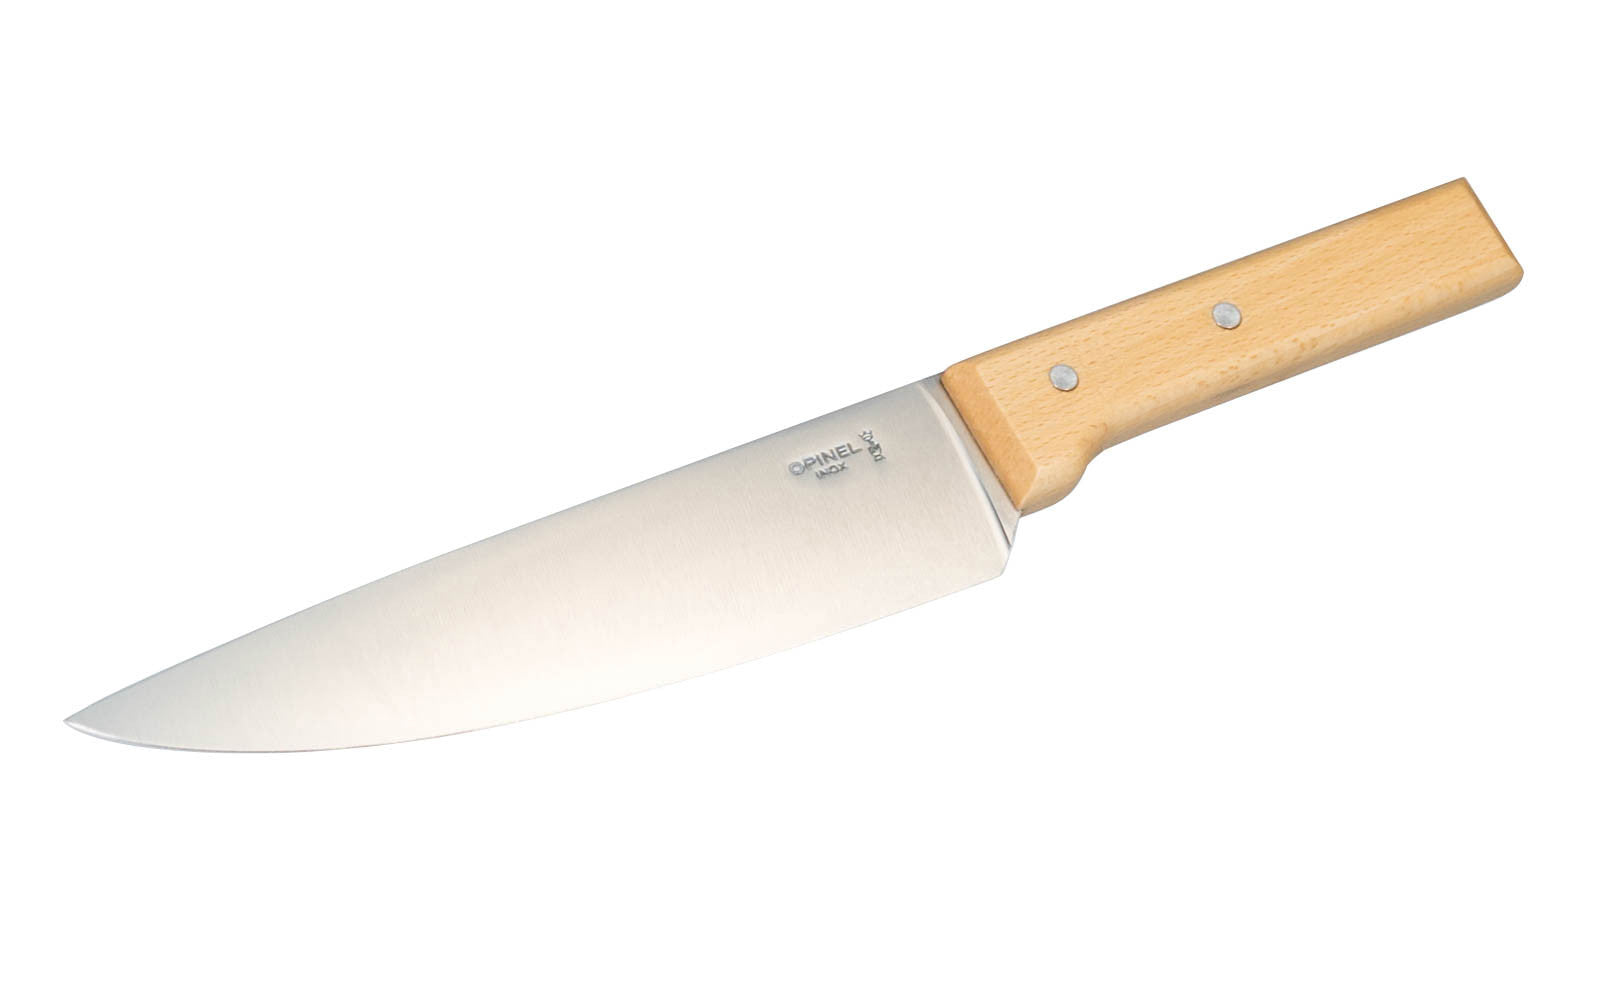 Opinel Multi-Purpose Chef Knife. Model No. 118.  This knife is great for slicing & chopping all kinds of meats, vegetables, & herbs.. Excellent for all kinds chopping & slicing ~ Lightweight yet very well-balanced feel ~ Varnished Beechwood handle